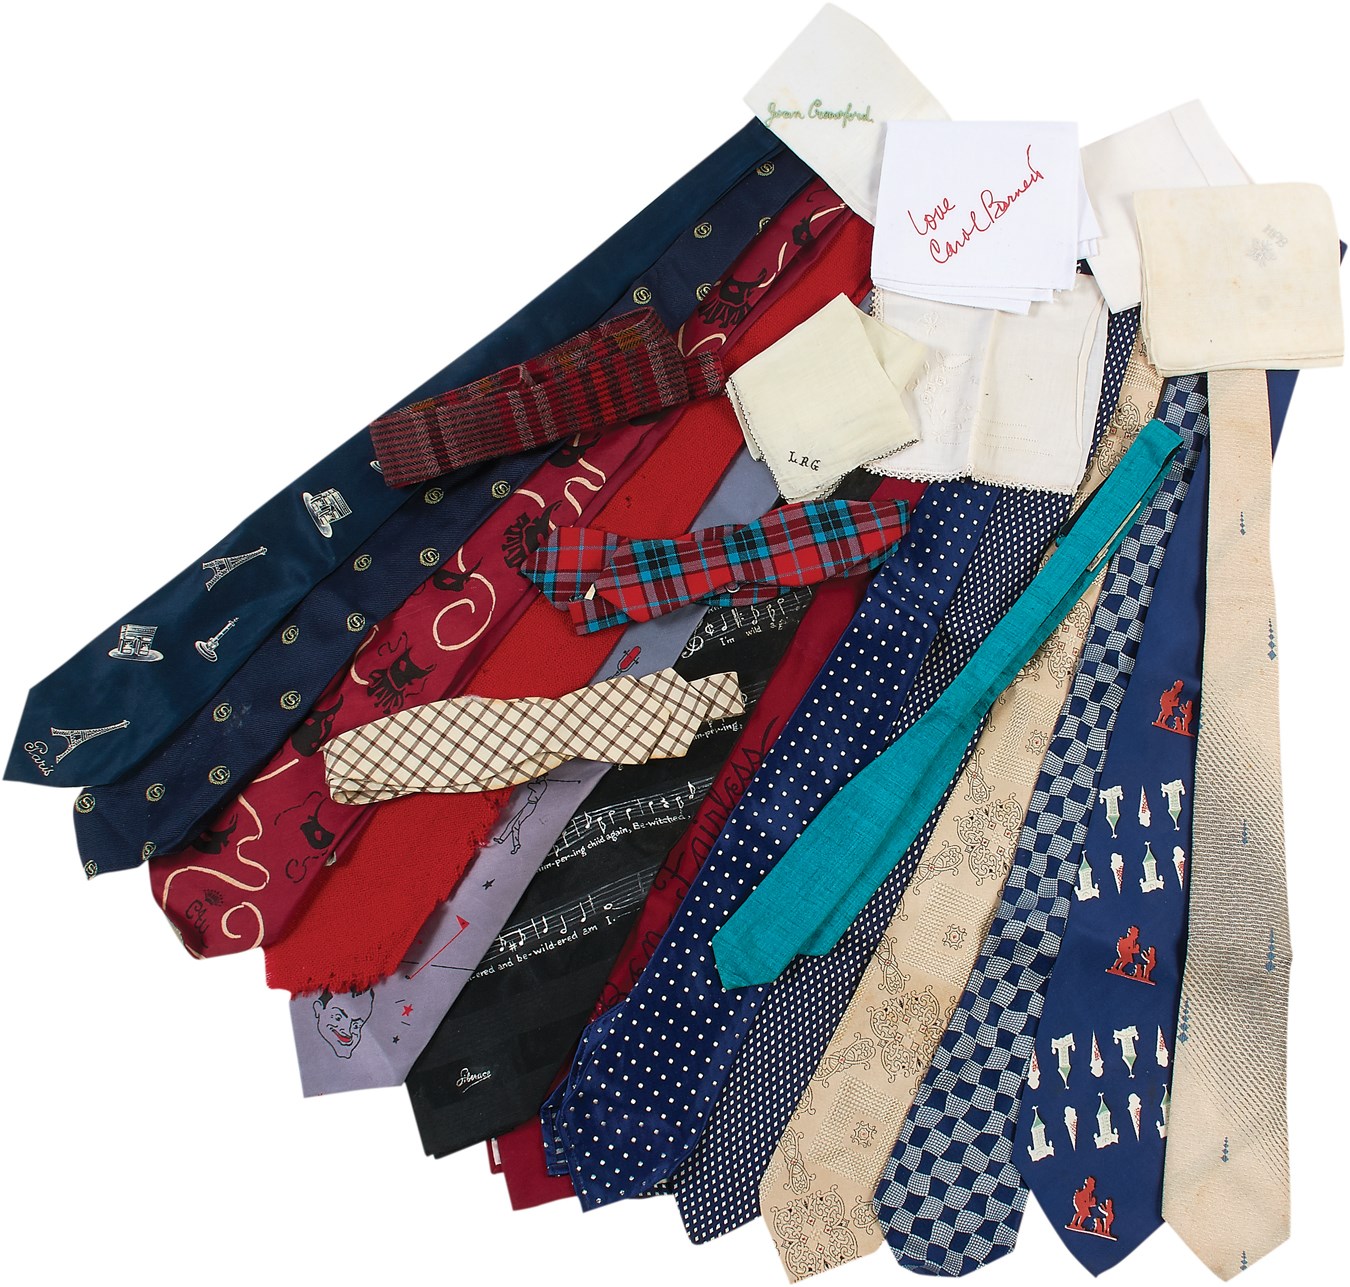 Jim Schendel Autograph Collection - Celebrity Owned Tie & Handkerchief Collection - Gifted to Schendel (100+)